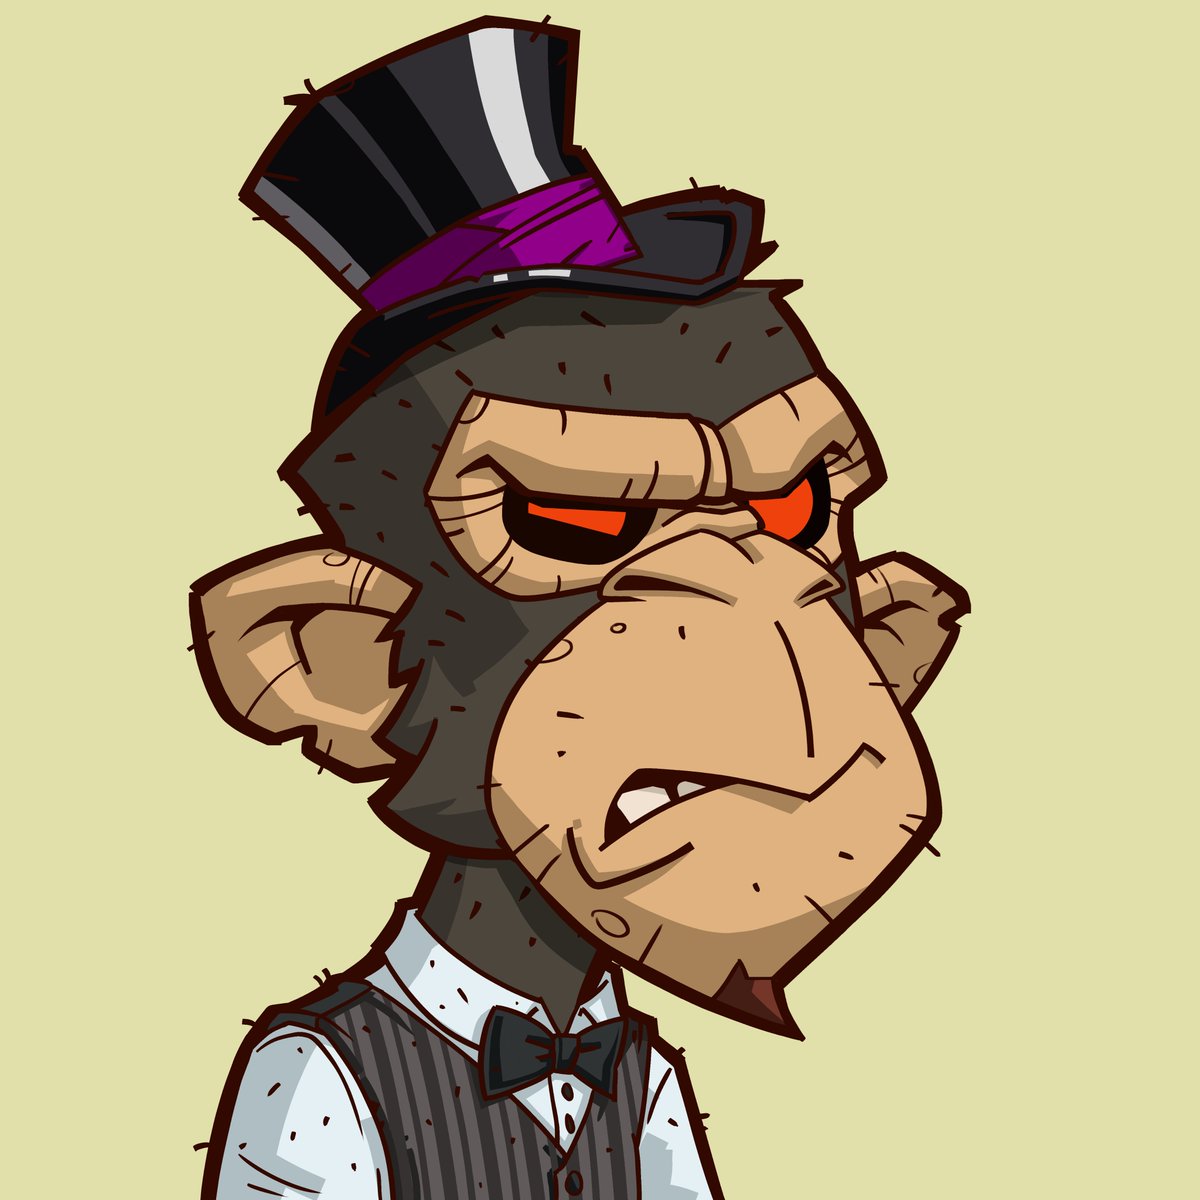 Sorry to my fam at @AngryApesNFT but I now own BOTH of the most dapper and best dressed apes in the collection :D You can try to prove me wrong but they are the only two with a tophat n tuxedo style bow tie :D Show me your runner up ;)
#AngryApesSociety #AngryButHappy